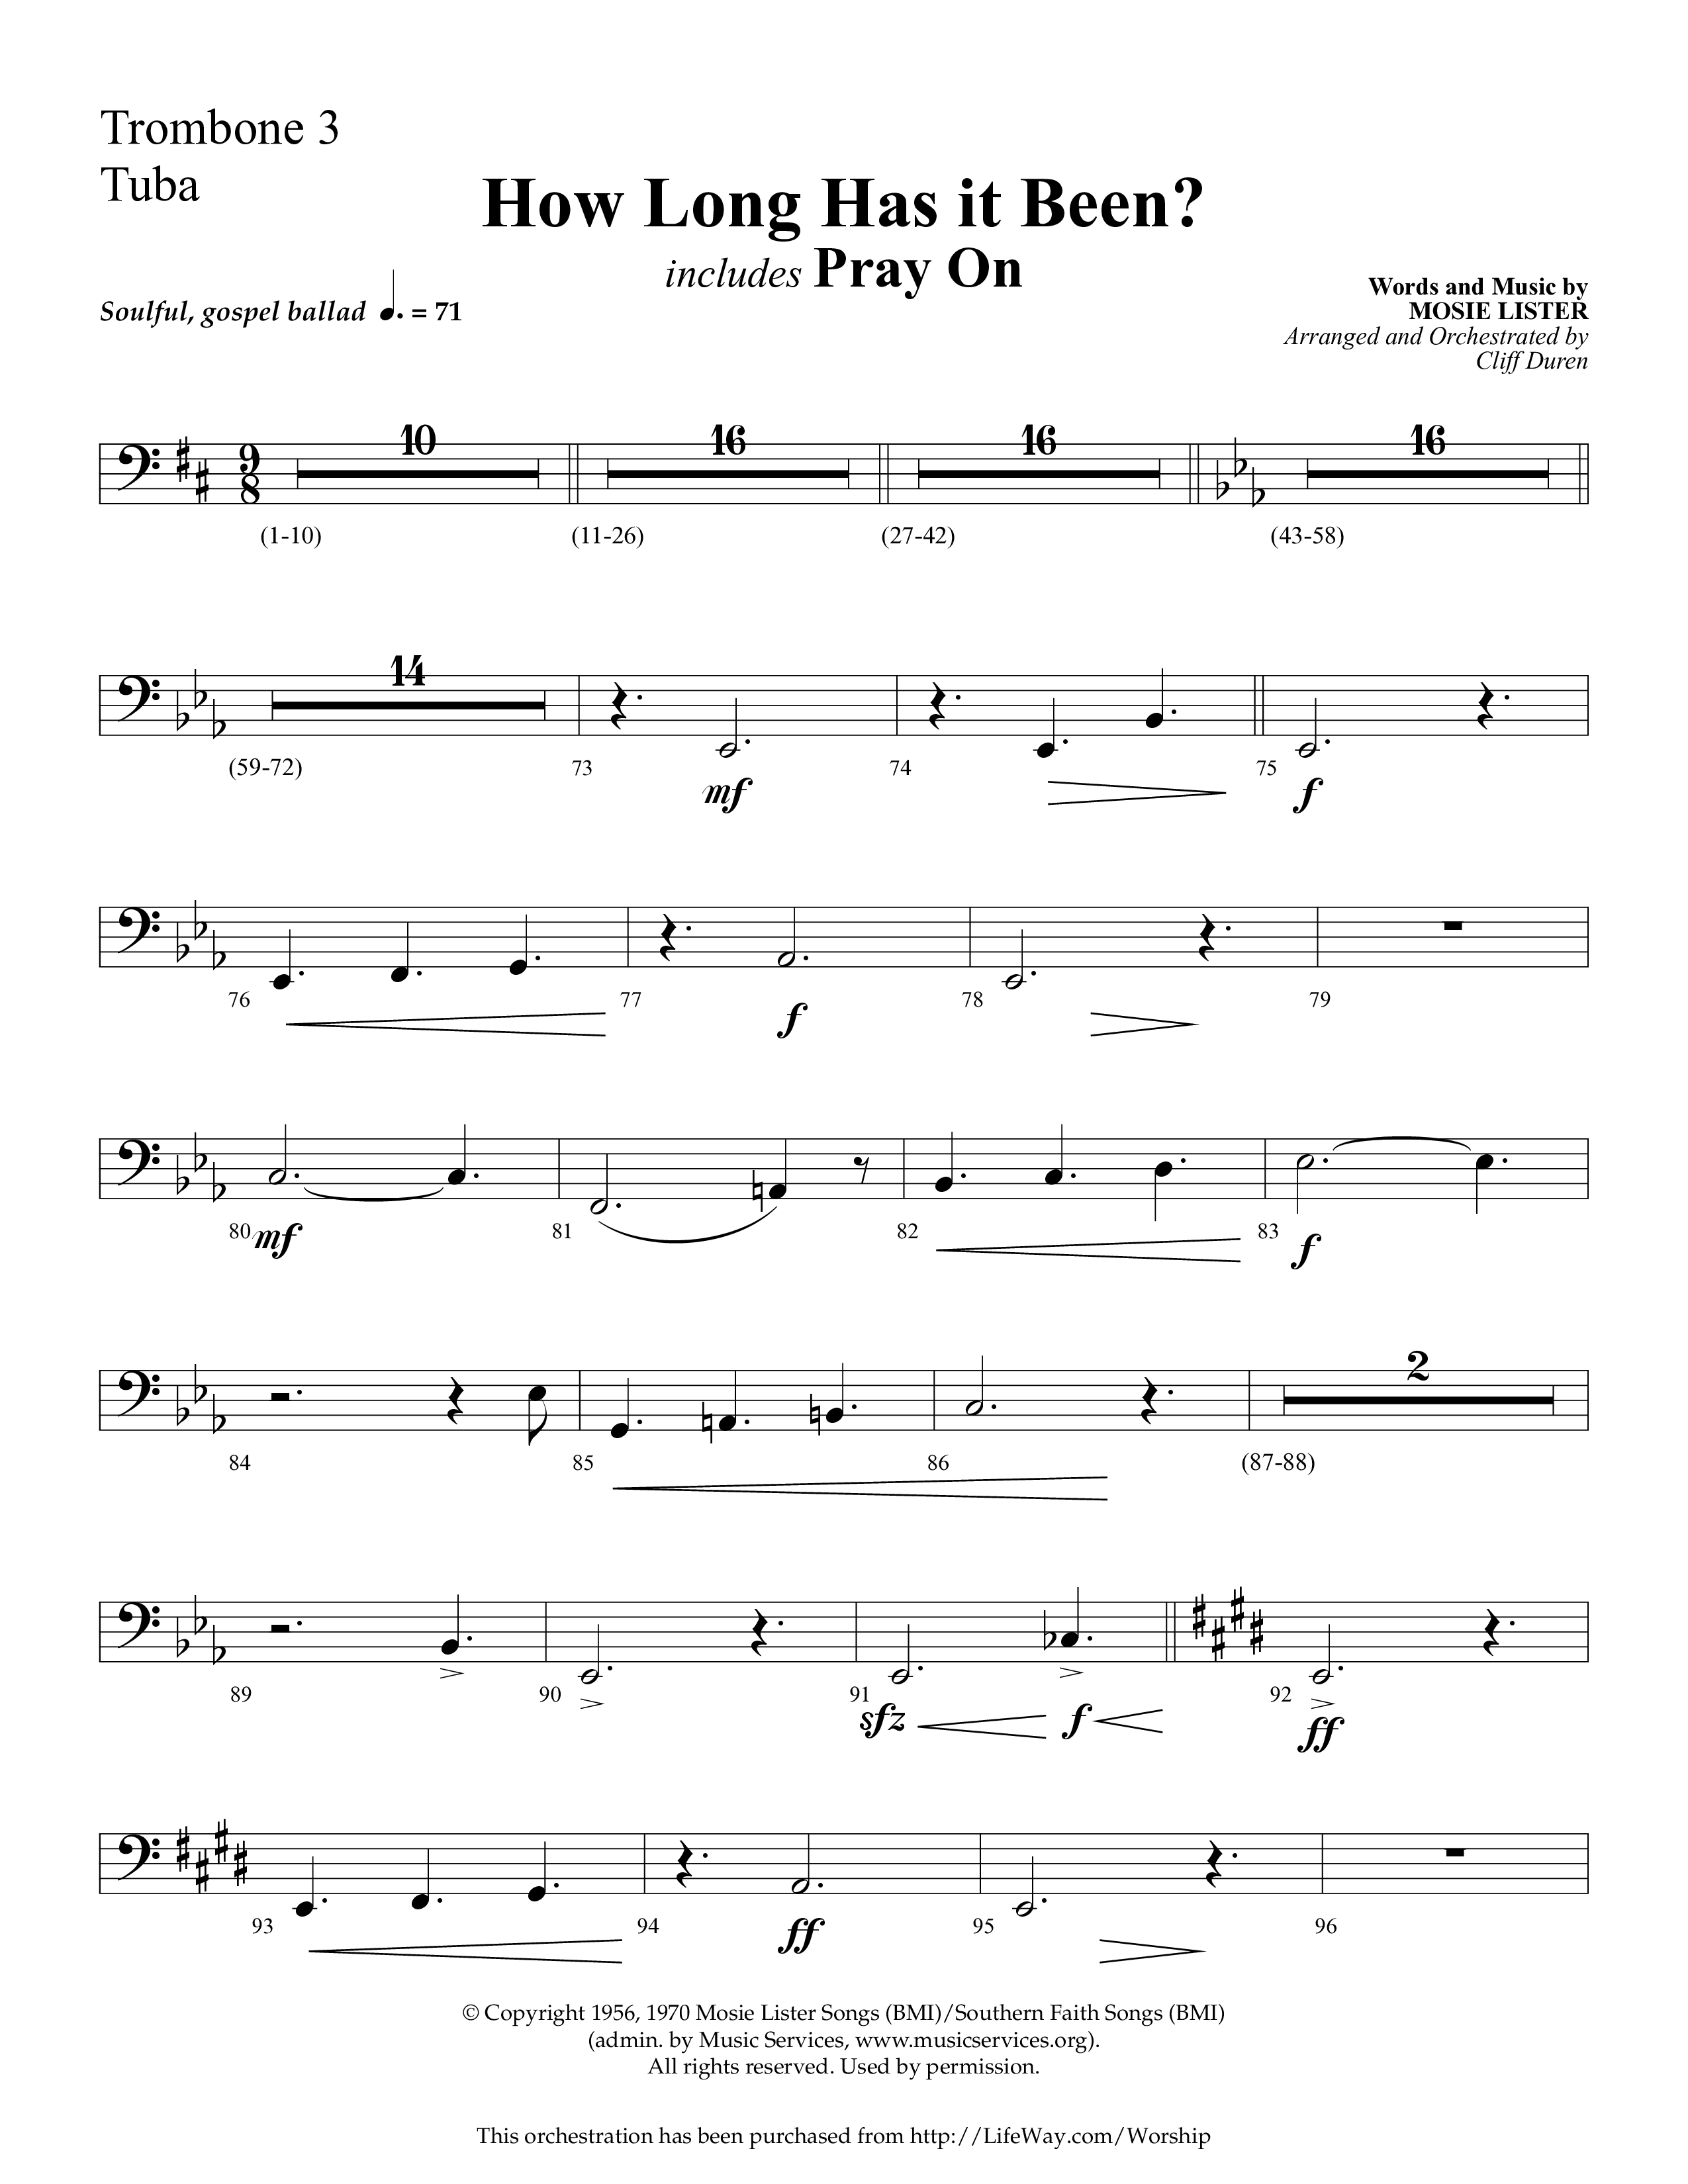 How Long Has It Been (with Pray On) (Choral Anthem SATB) Trombone 3/Tuba (Lifeway Choral / Arr. Cliff Duren)